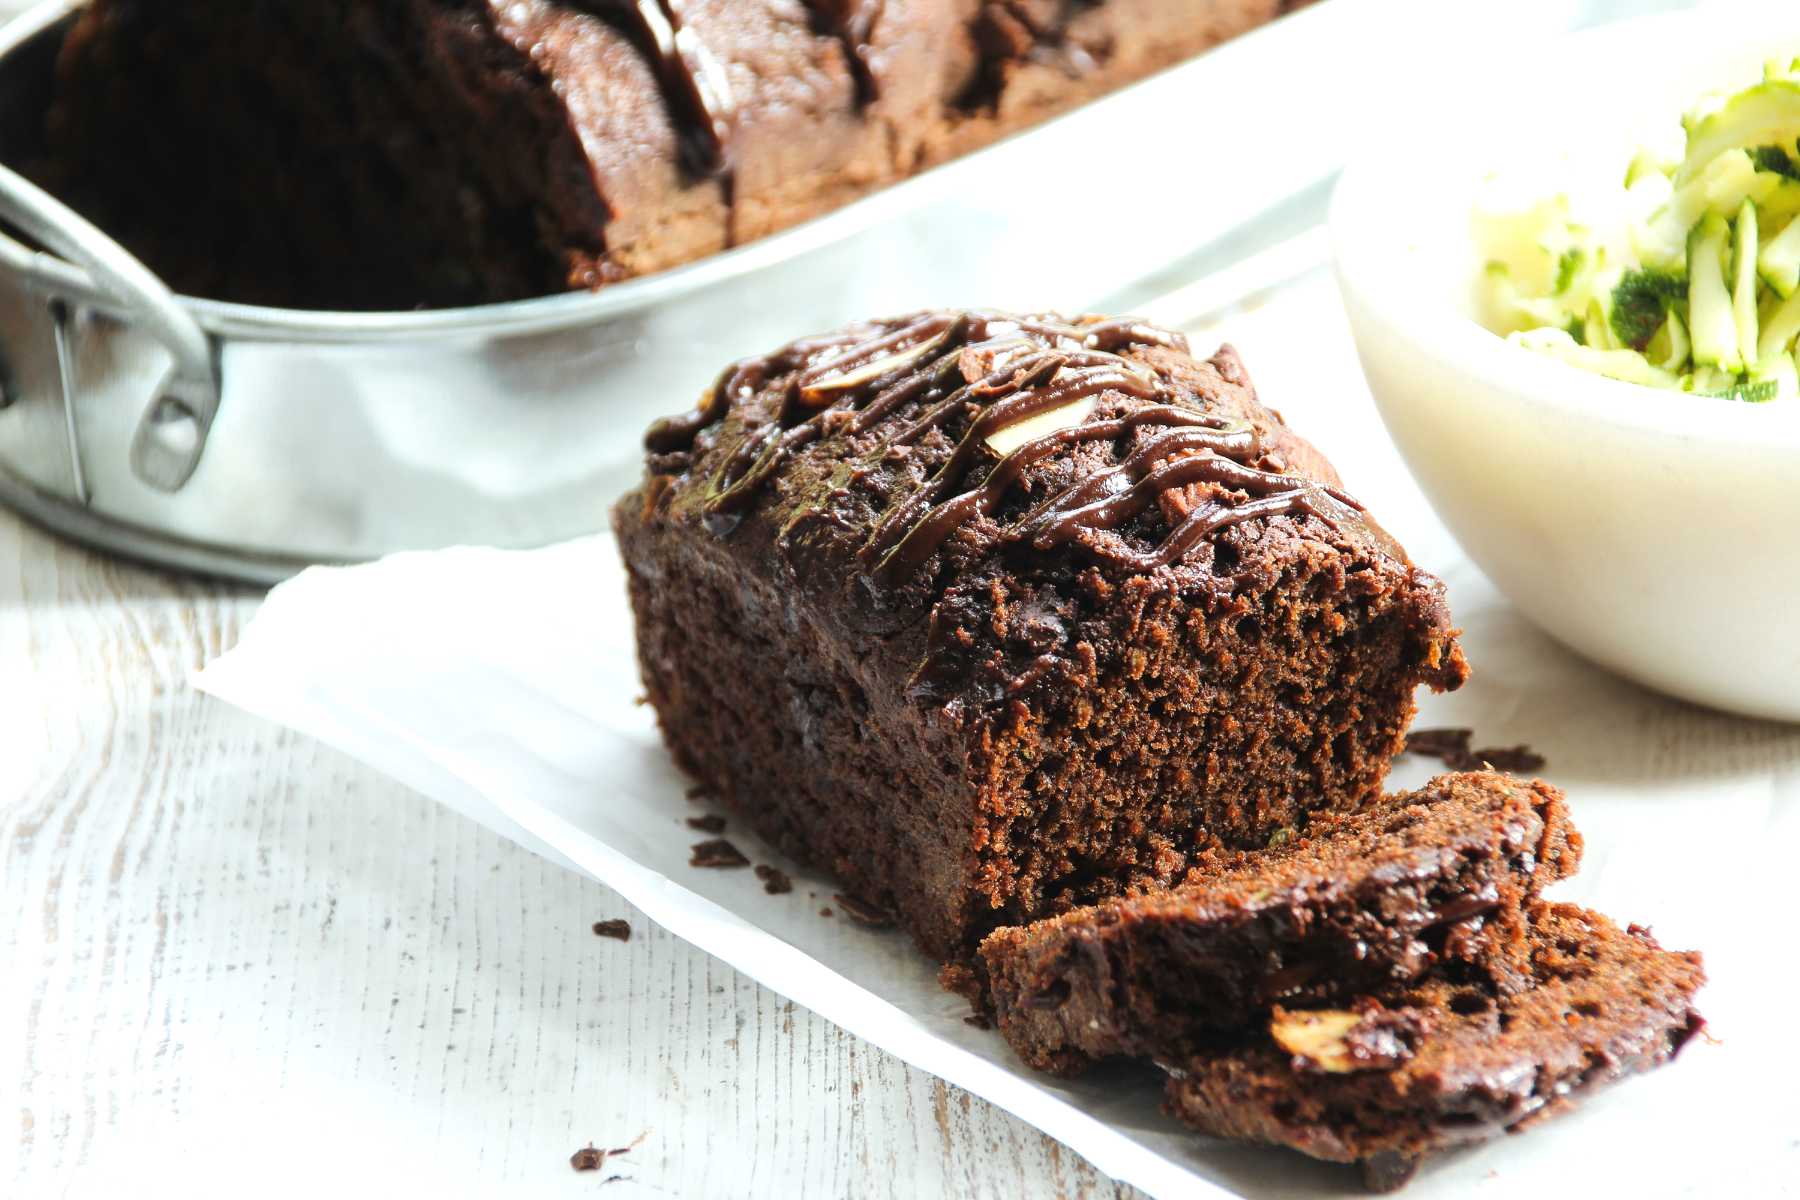 Chocolate Courgette Cake